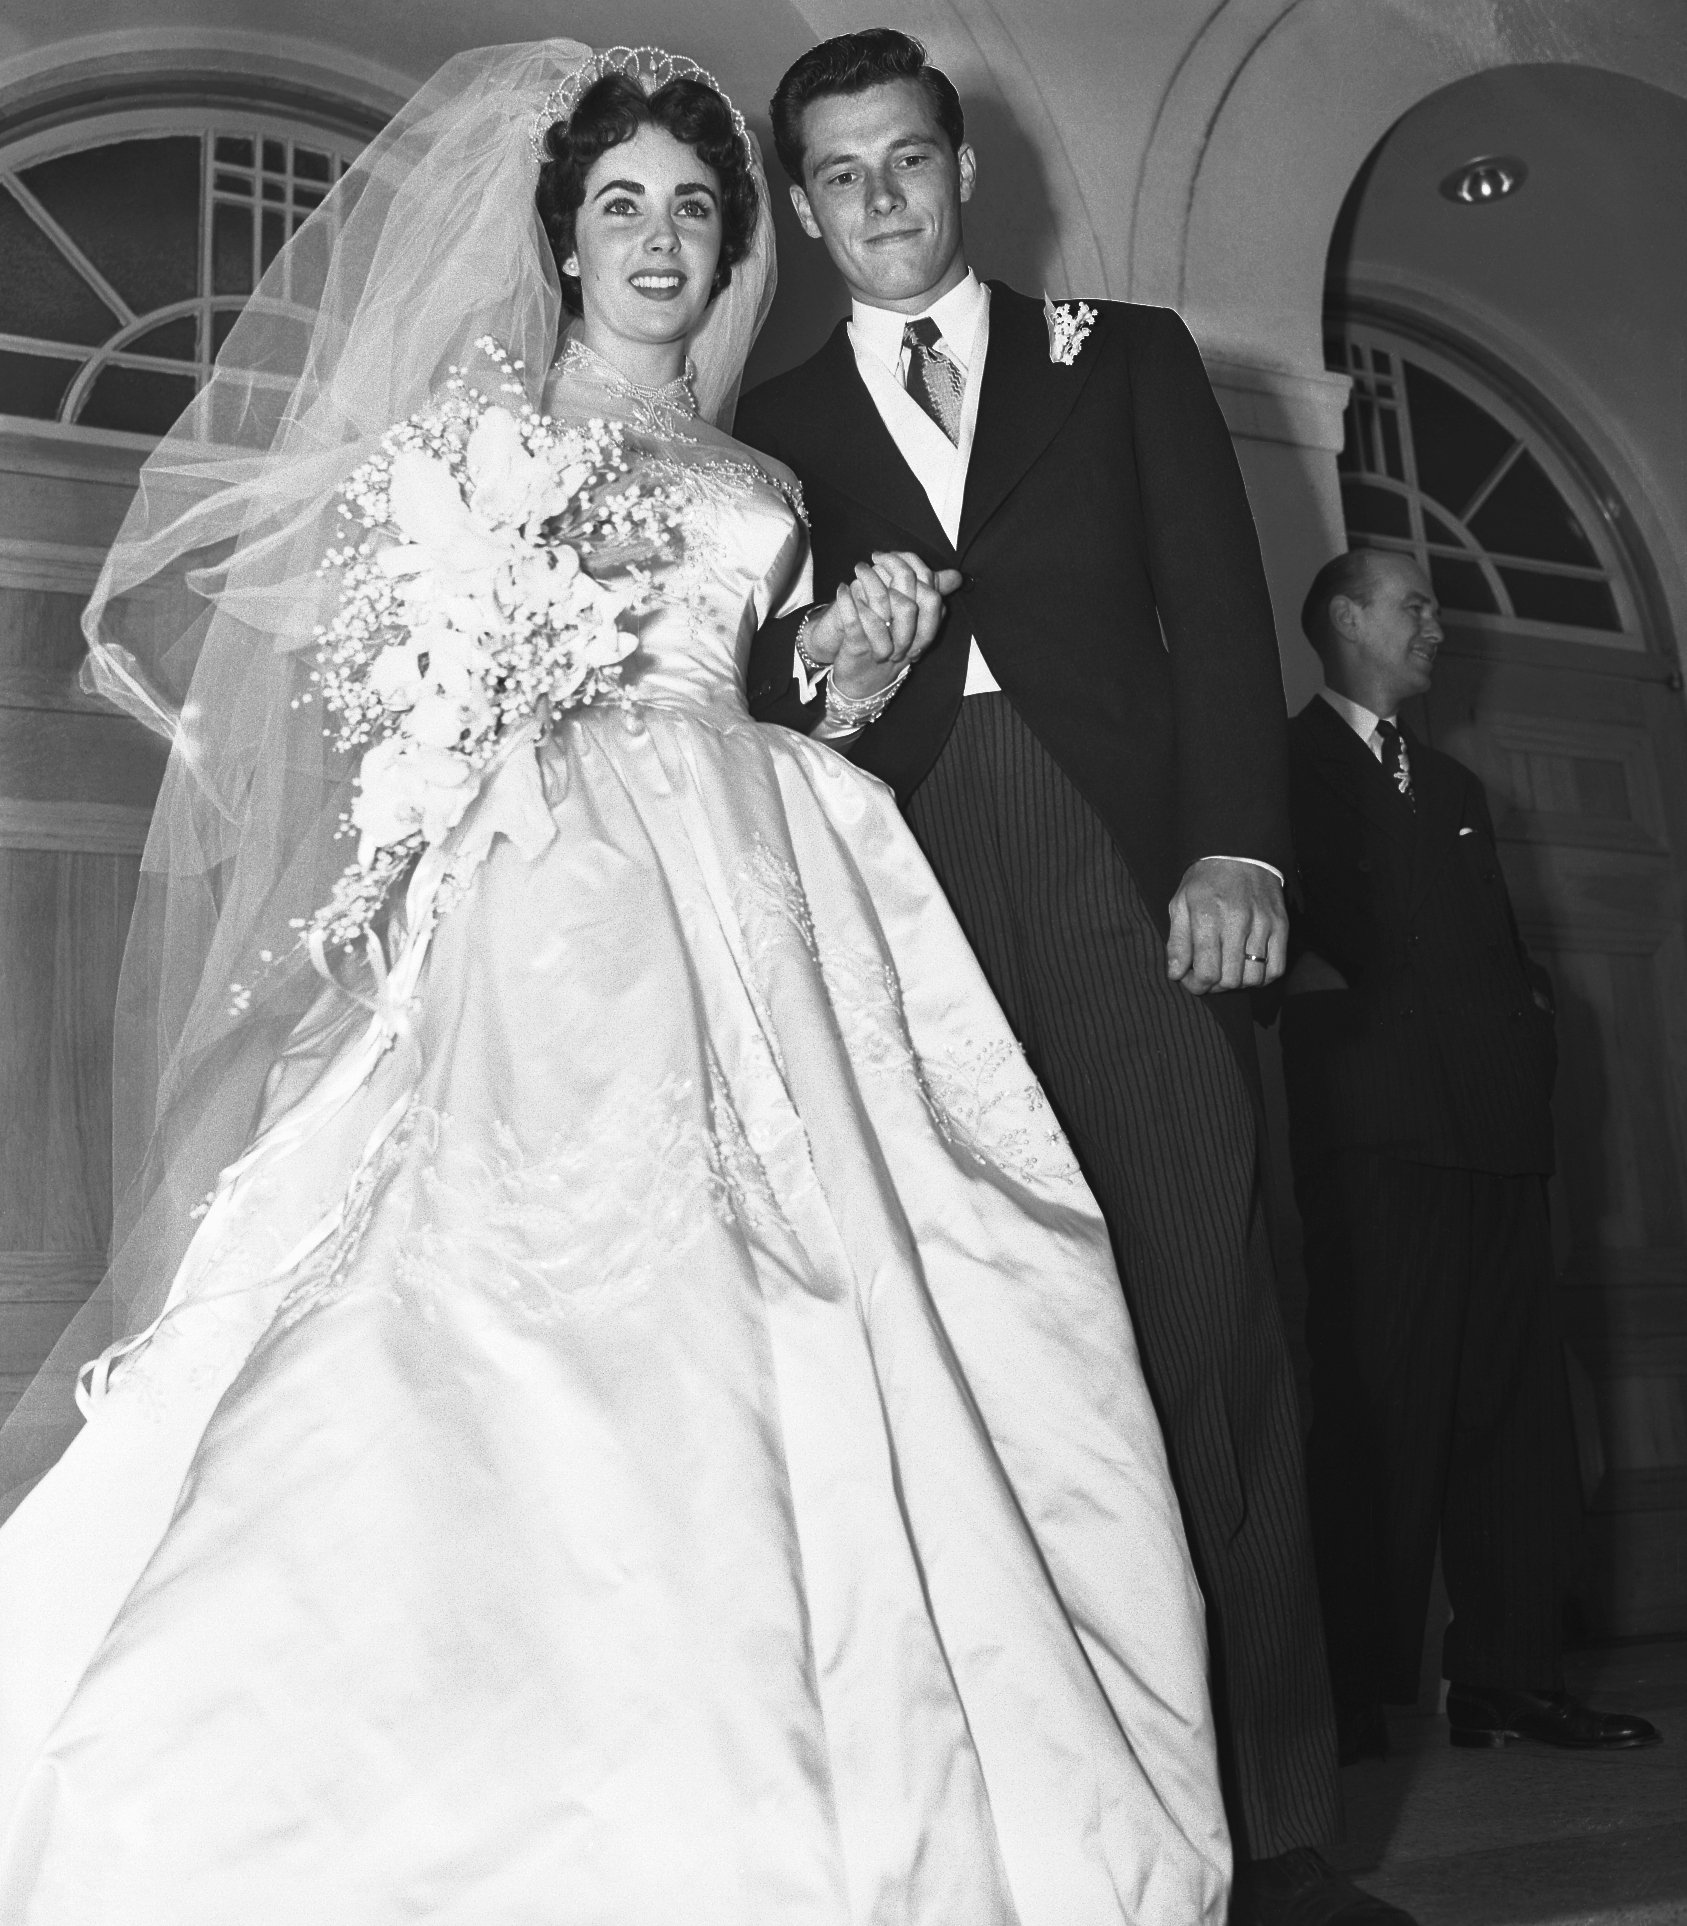 Elizabeth Taylor and Conrad Hilton Jr. during their wedding in California on May 6, 1950 | Source: Getty Images